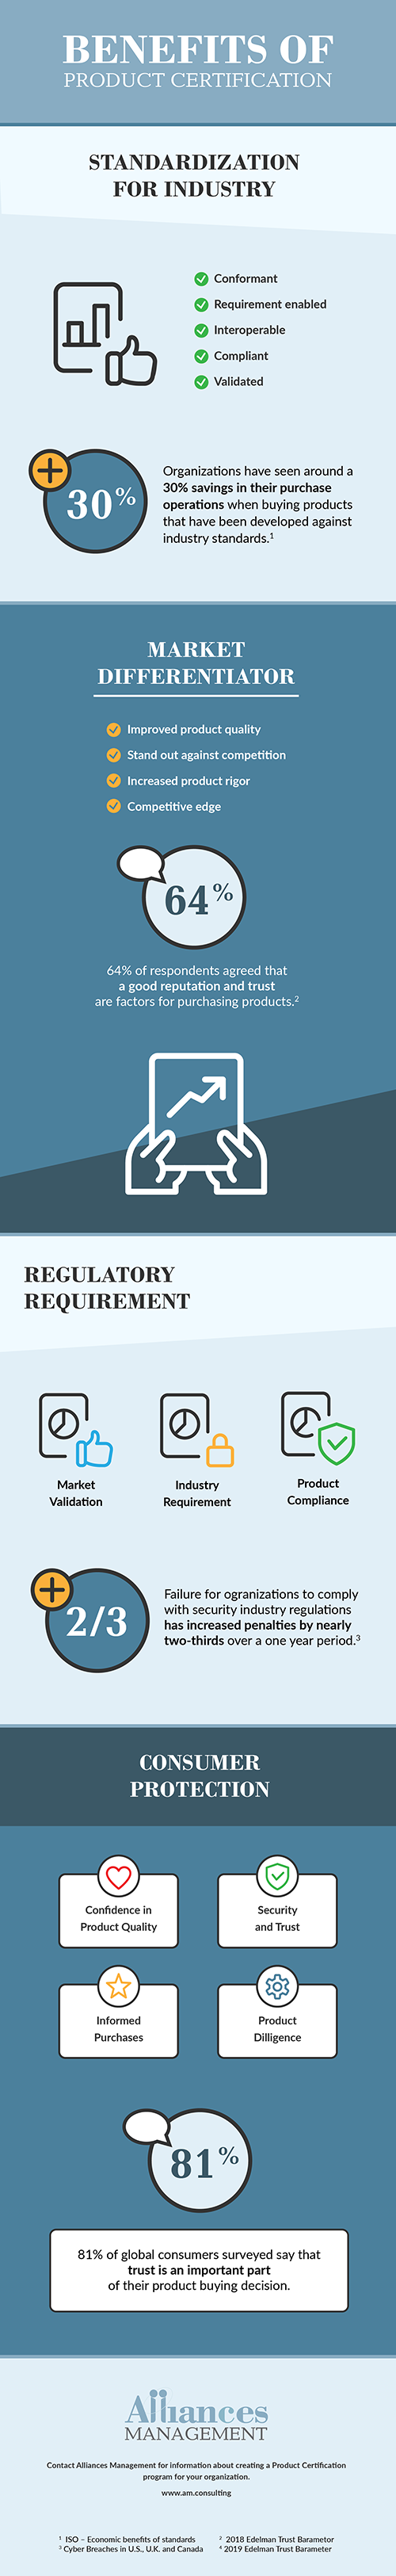 Benefits of Product Certification Infographic